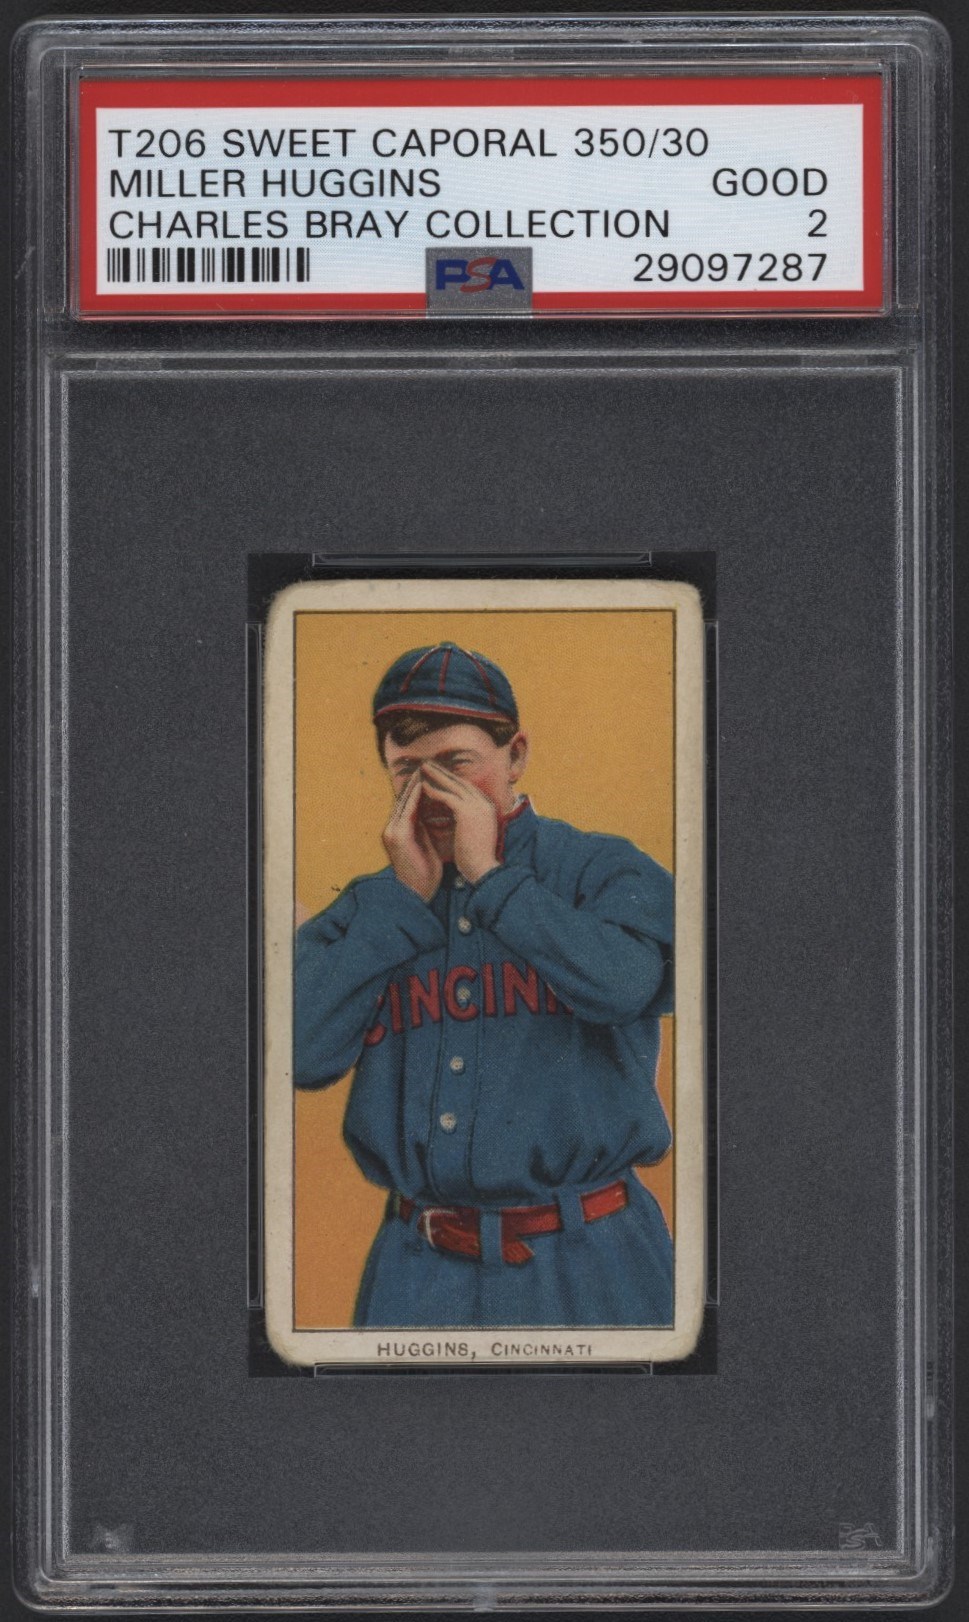 - T206 Sweet Caporal 350/30 Miller Huggins PSA 2 From the Charles Bray Collection.